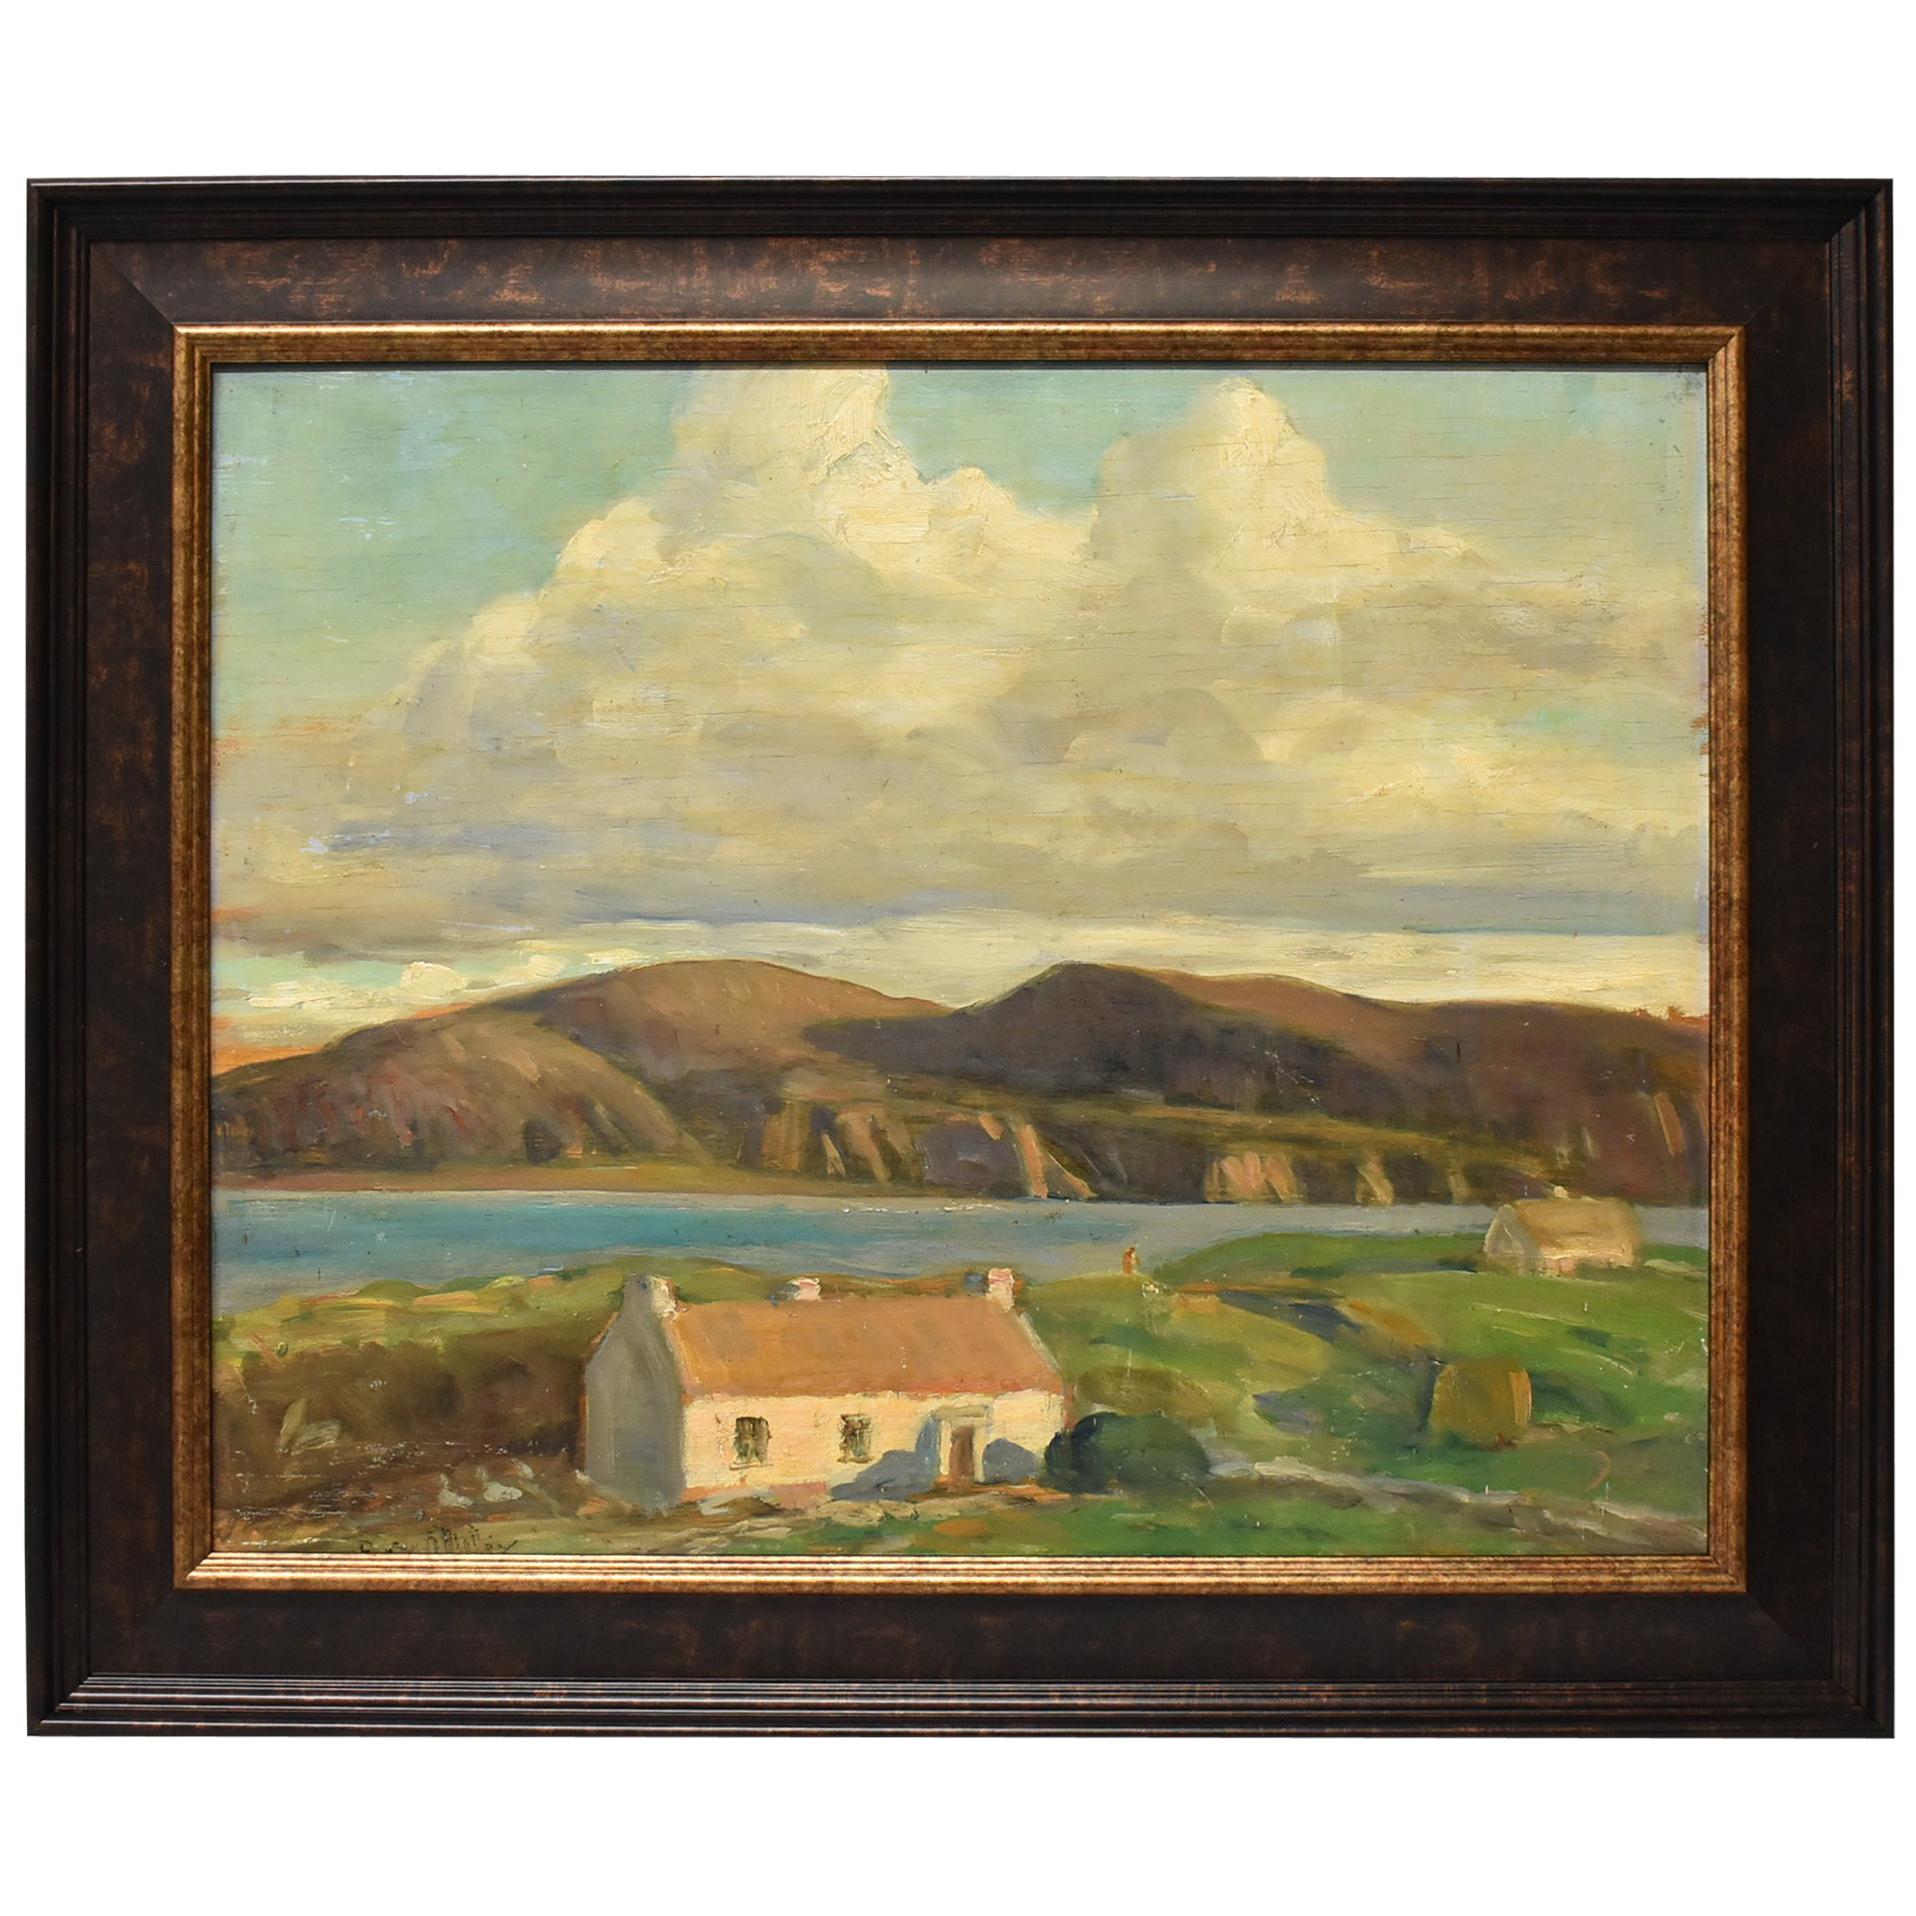 Original Oil Painting Landscape Seascape with House by Michael Power O' Malley